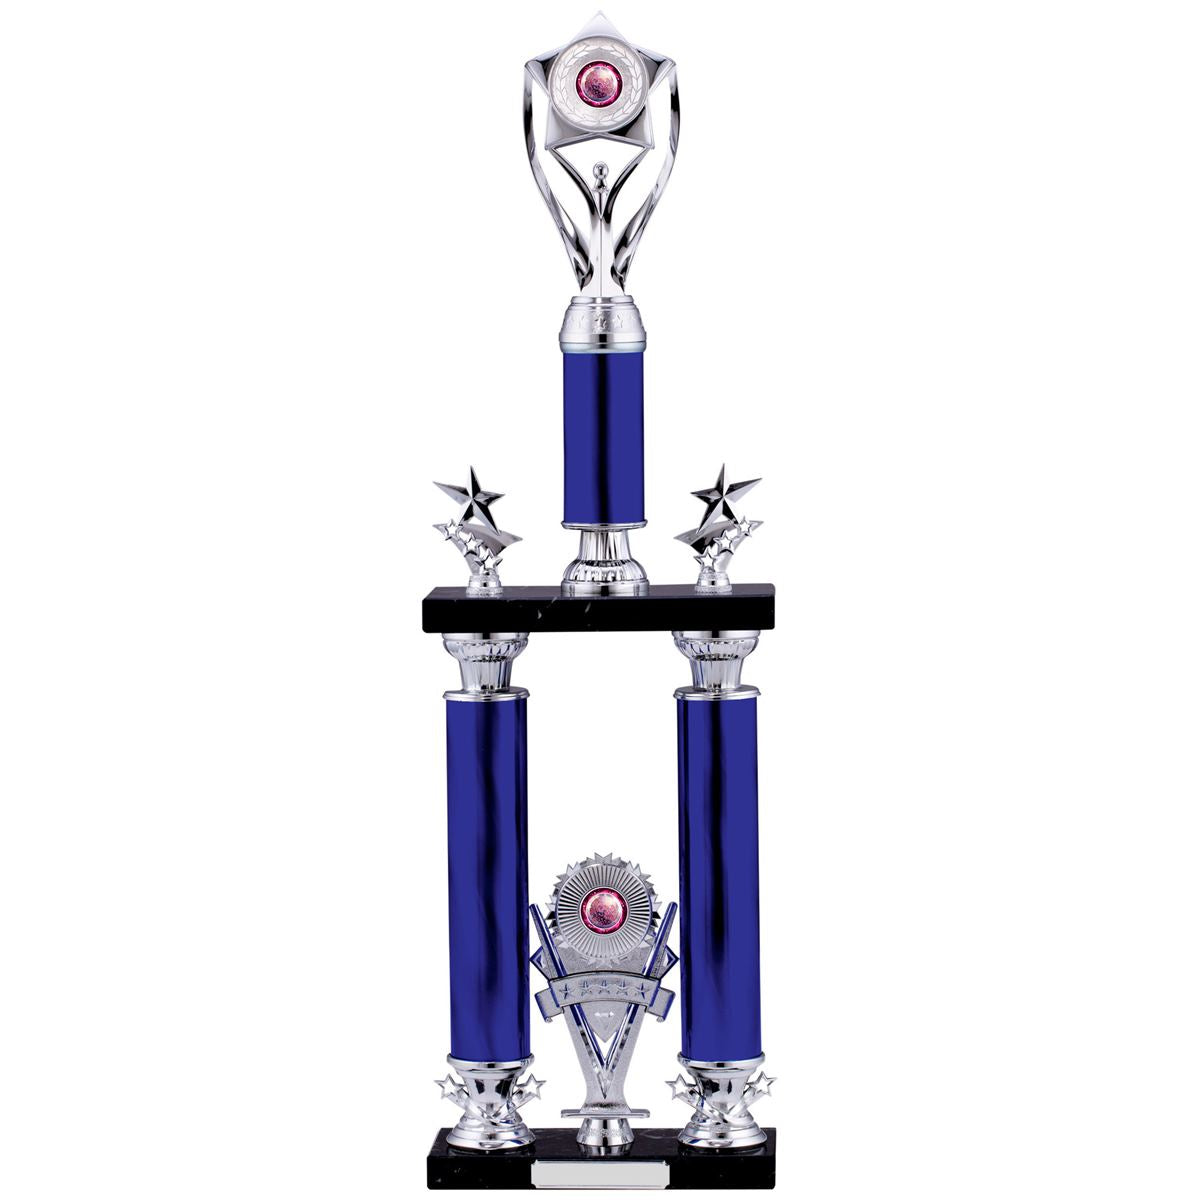 Large Tower Trophy Victory Award in Blue and Silver - C Size